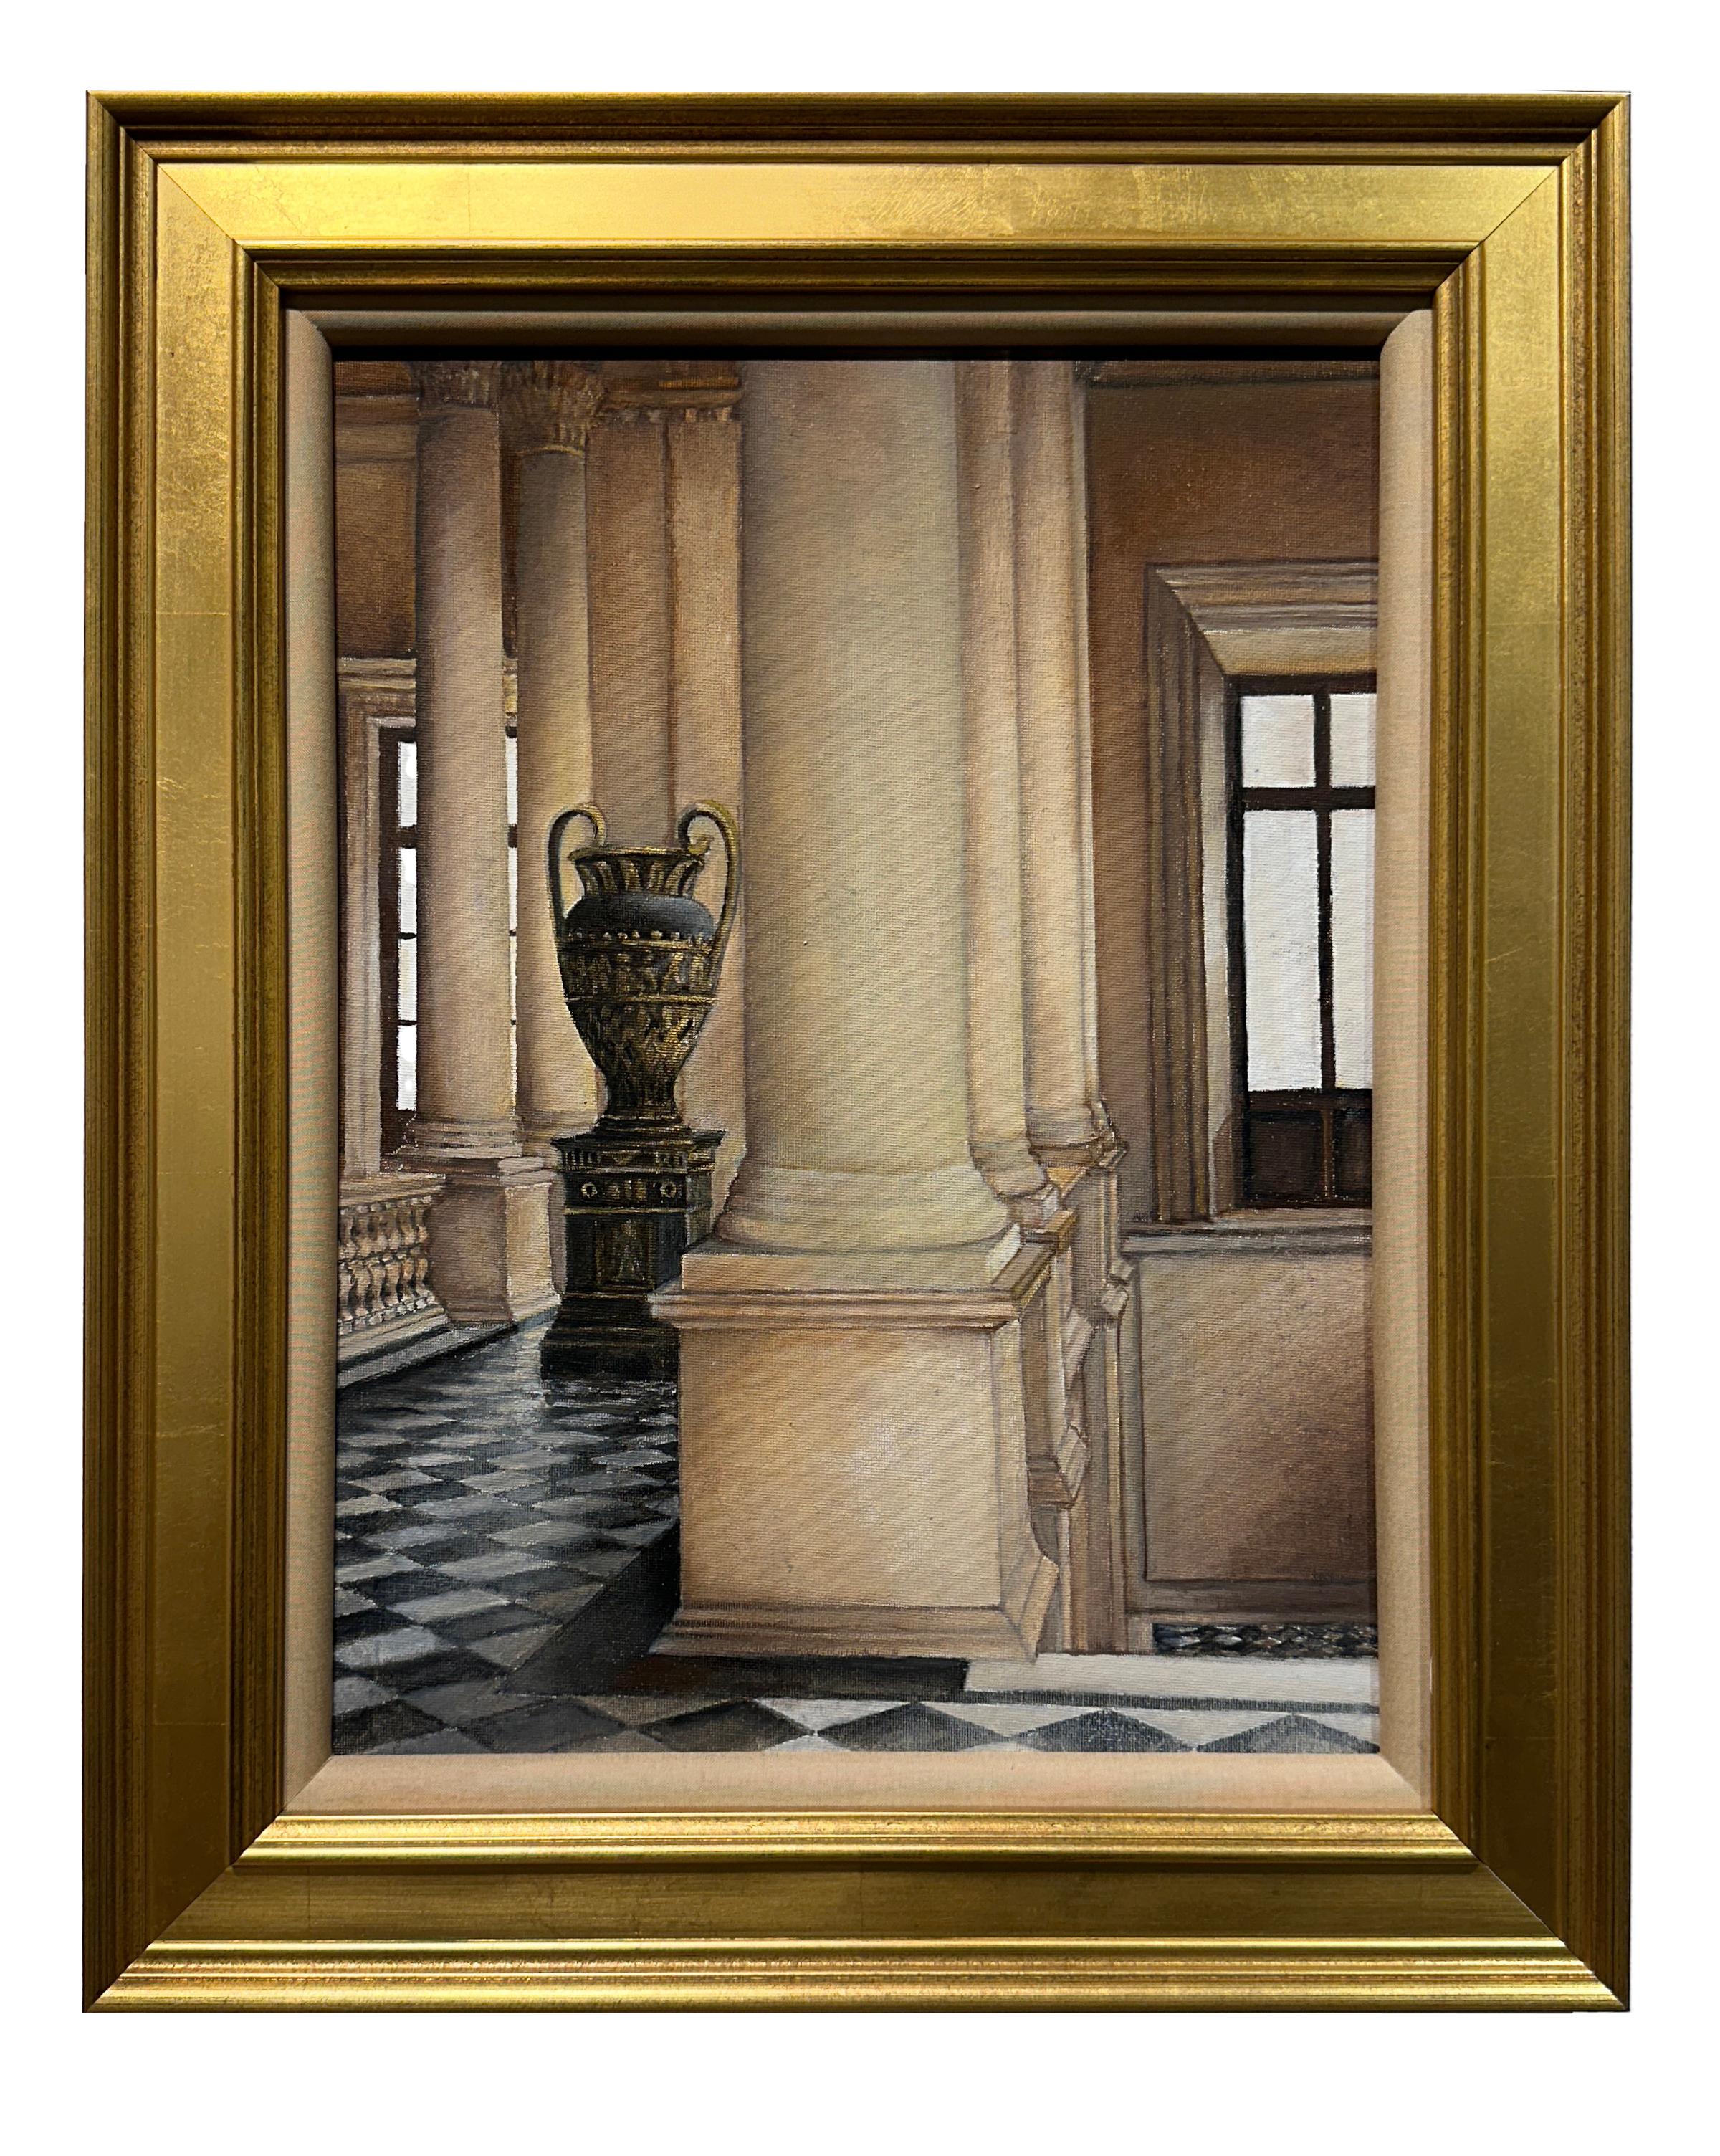 Richard Gibbons Interior Painting - The Louvre - Interior Architectural Scene, Framed, Original Oil on Canvas